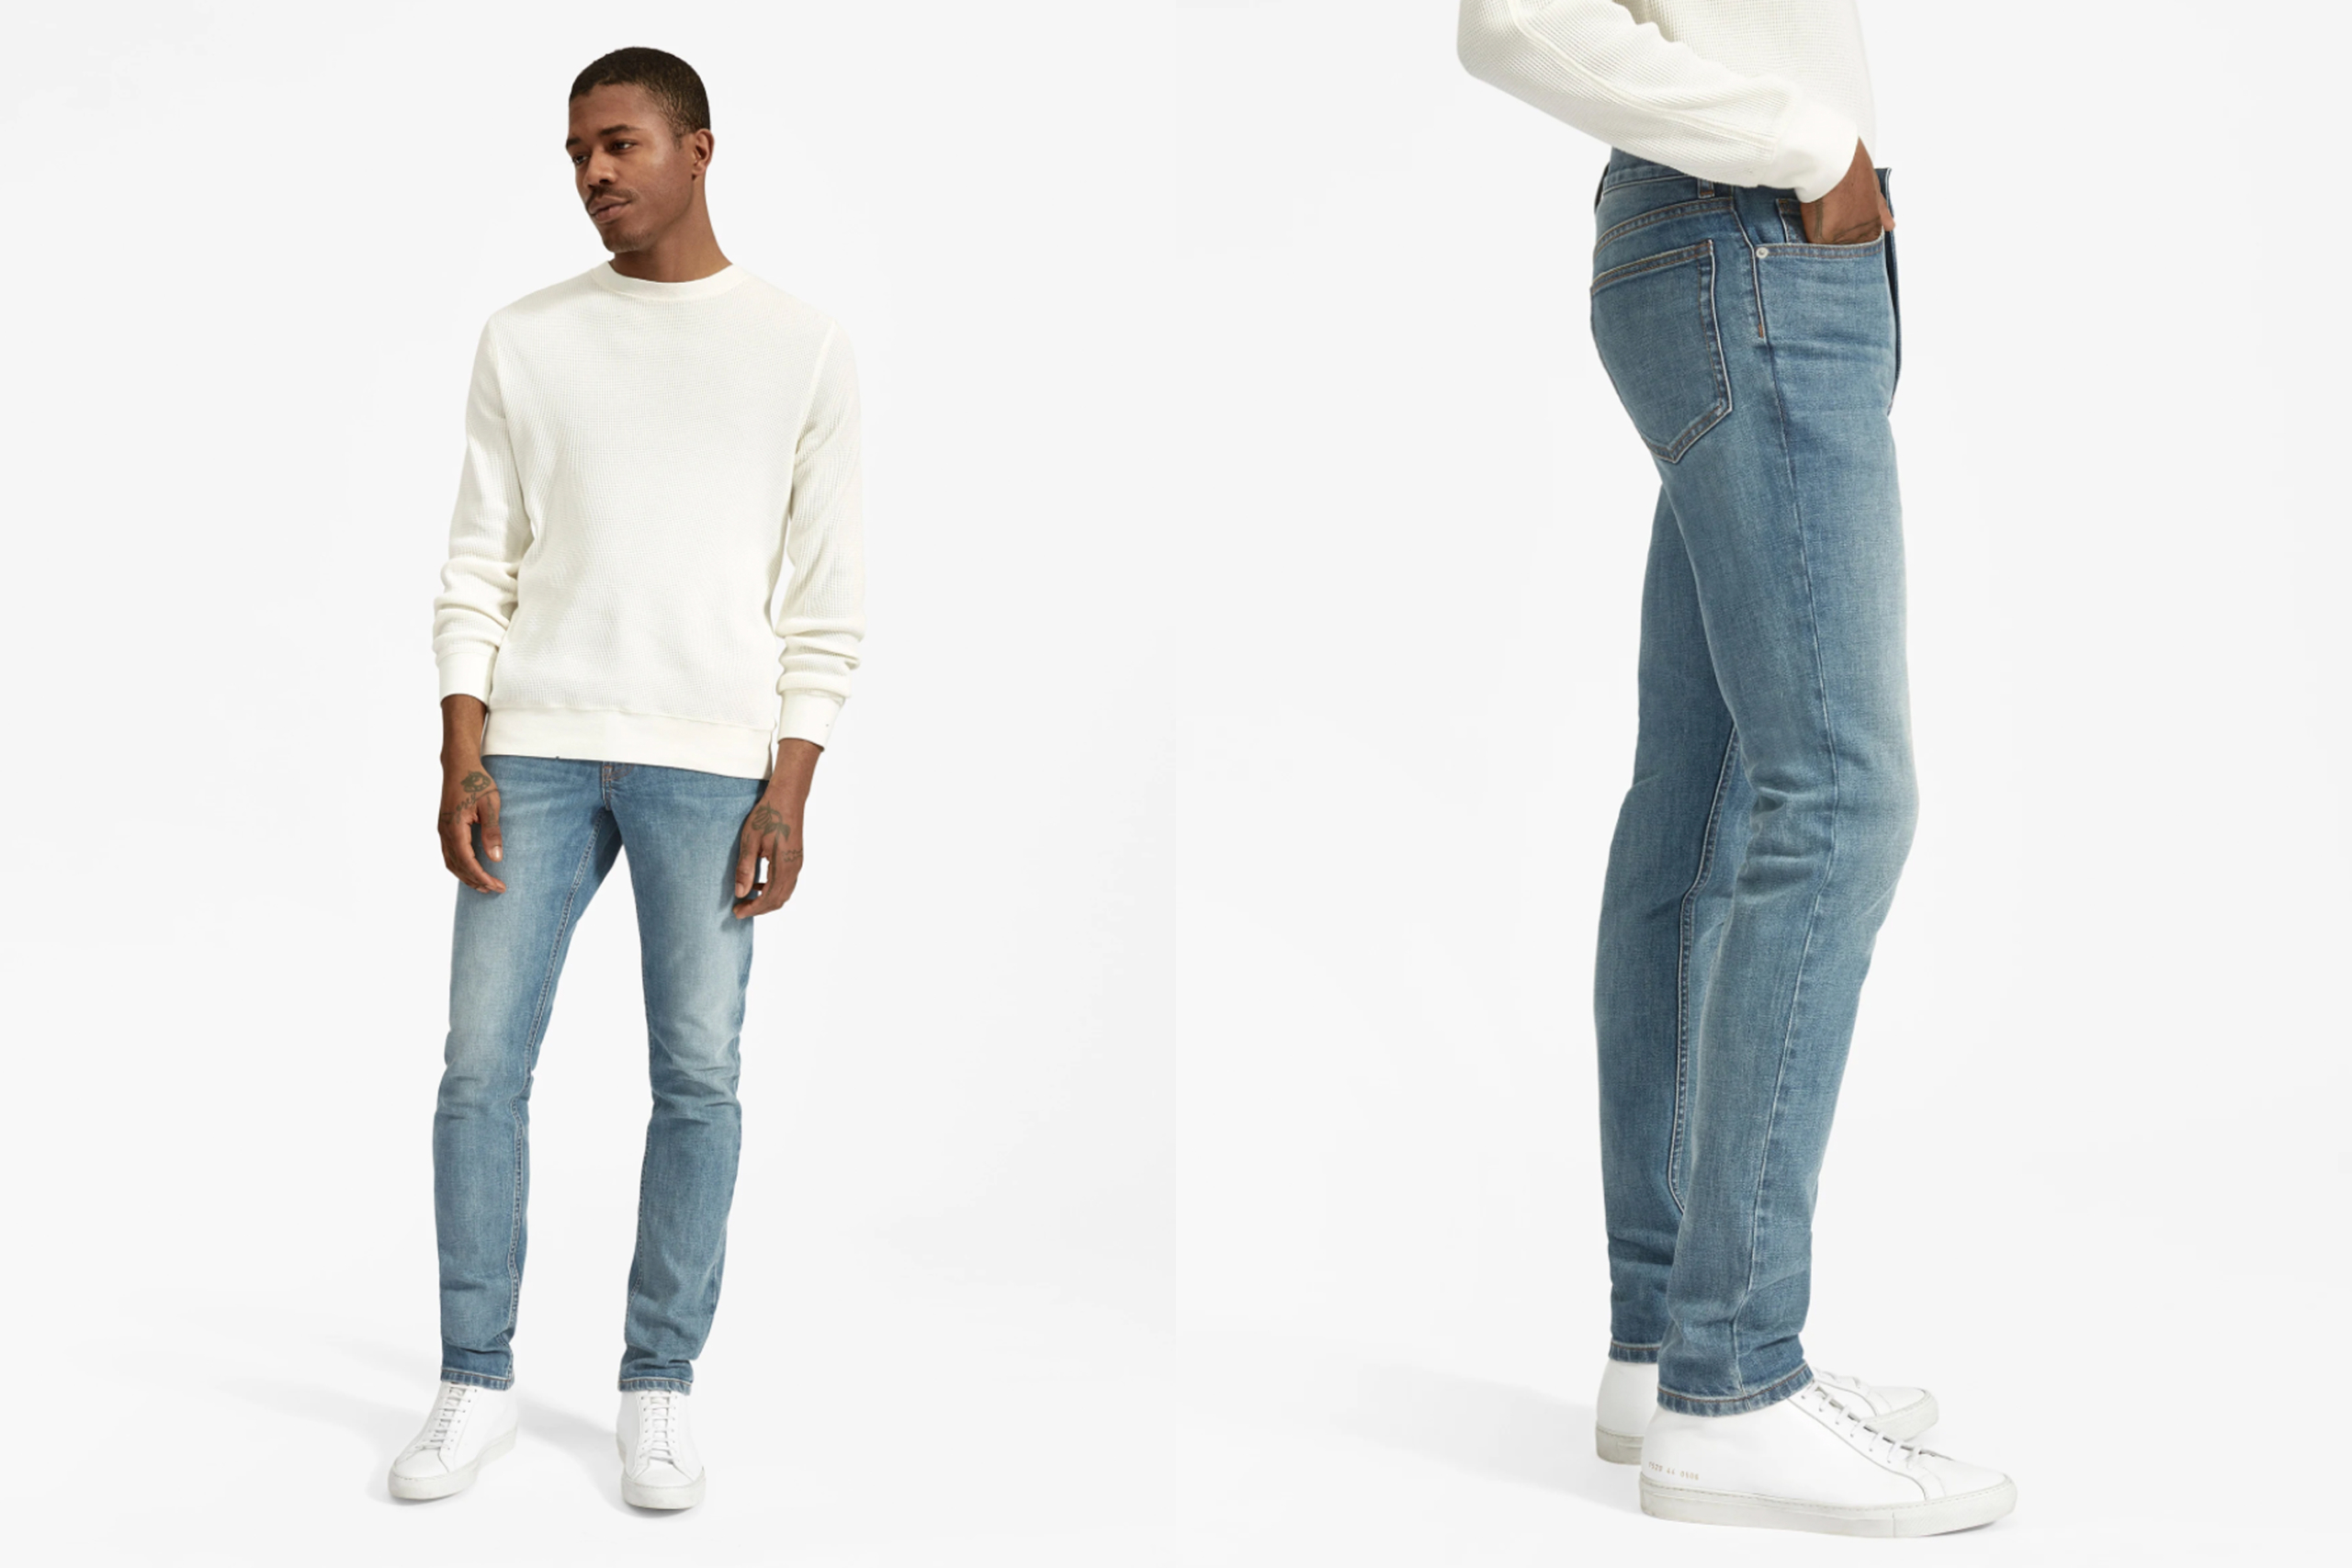 Ultimate Denim Guide: to Wear Jeans Based on Style and Wash in 2021 - The Manual